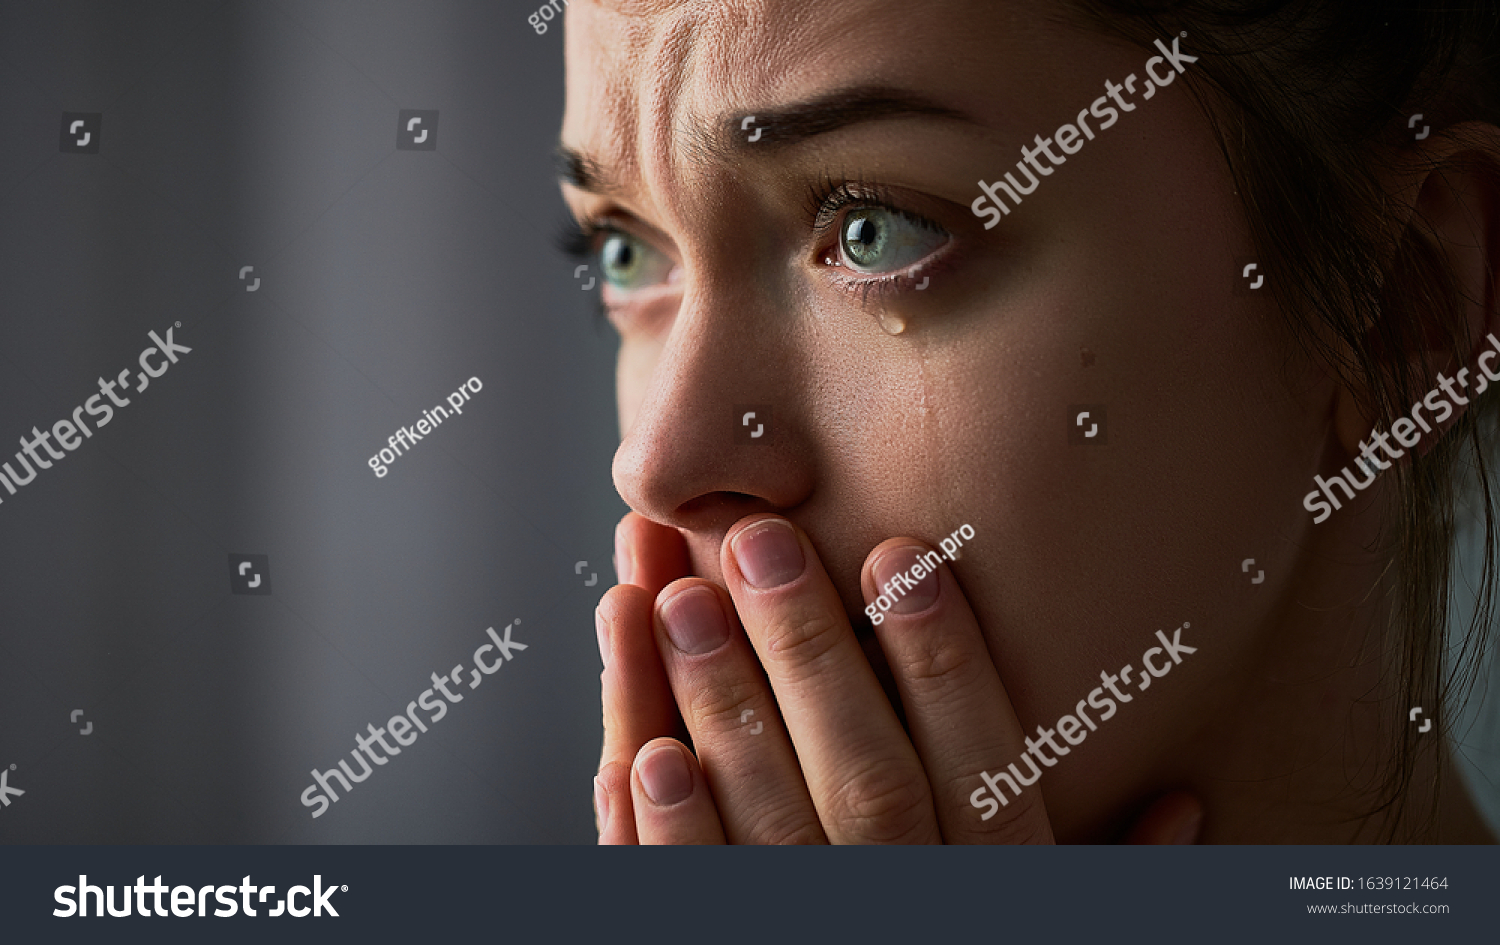 Sad desperate grieving crying woman with folded hands and tears eyes during trouble, life difficulties, depression and emotional problems #1639121464